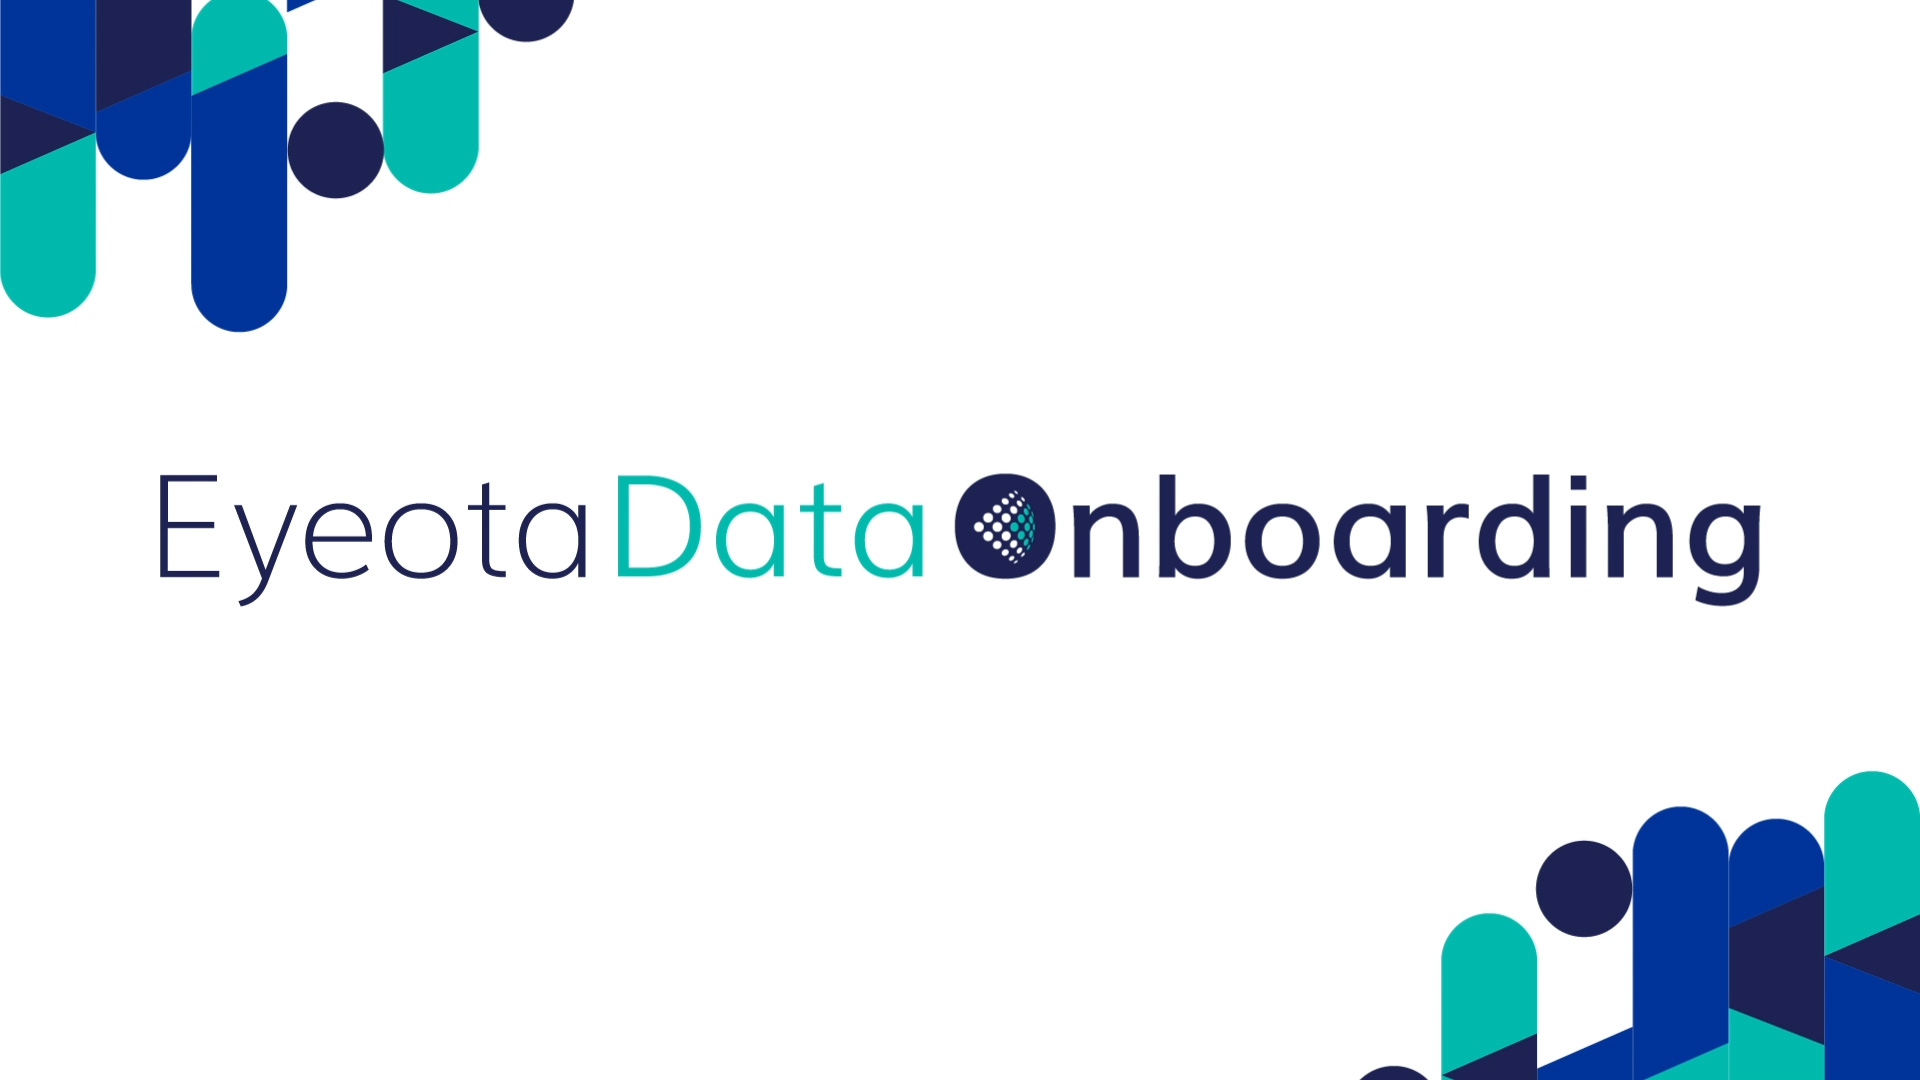 an illustrated image featuring dark blue, medium blue, and green abstract shapes with text that says "Eyeota Data Onboarding"